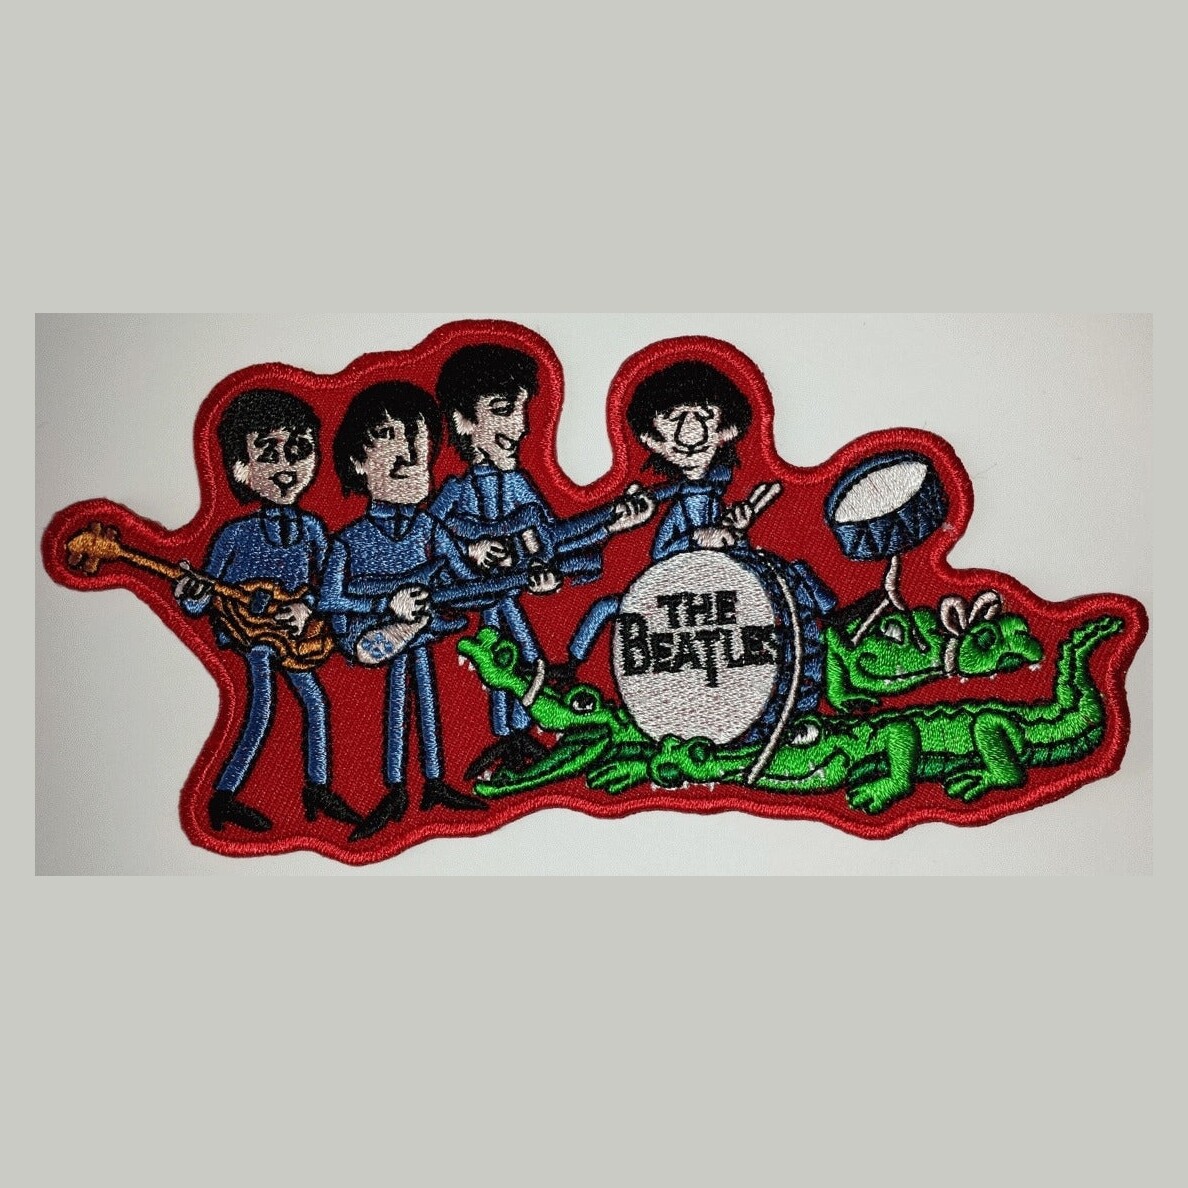 The Beatles Cartoon "Alligators" 5 3/4"L Embroidered Patch